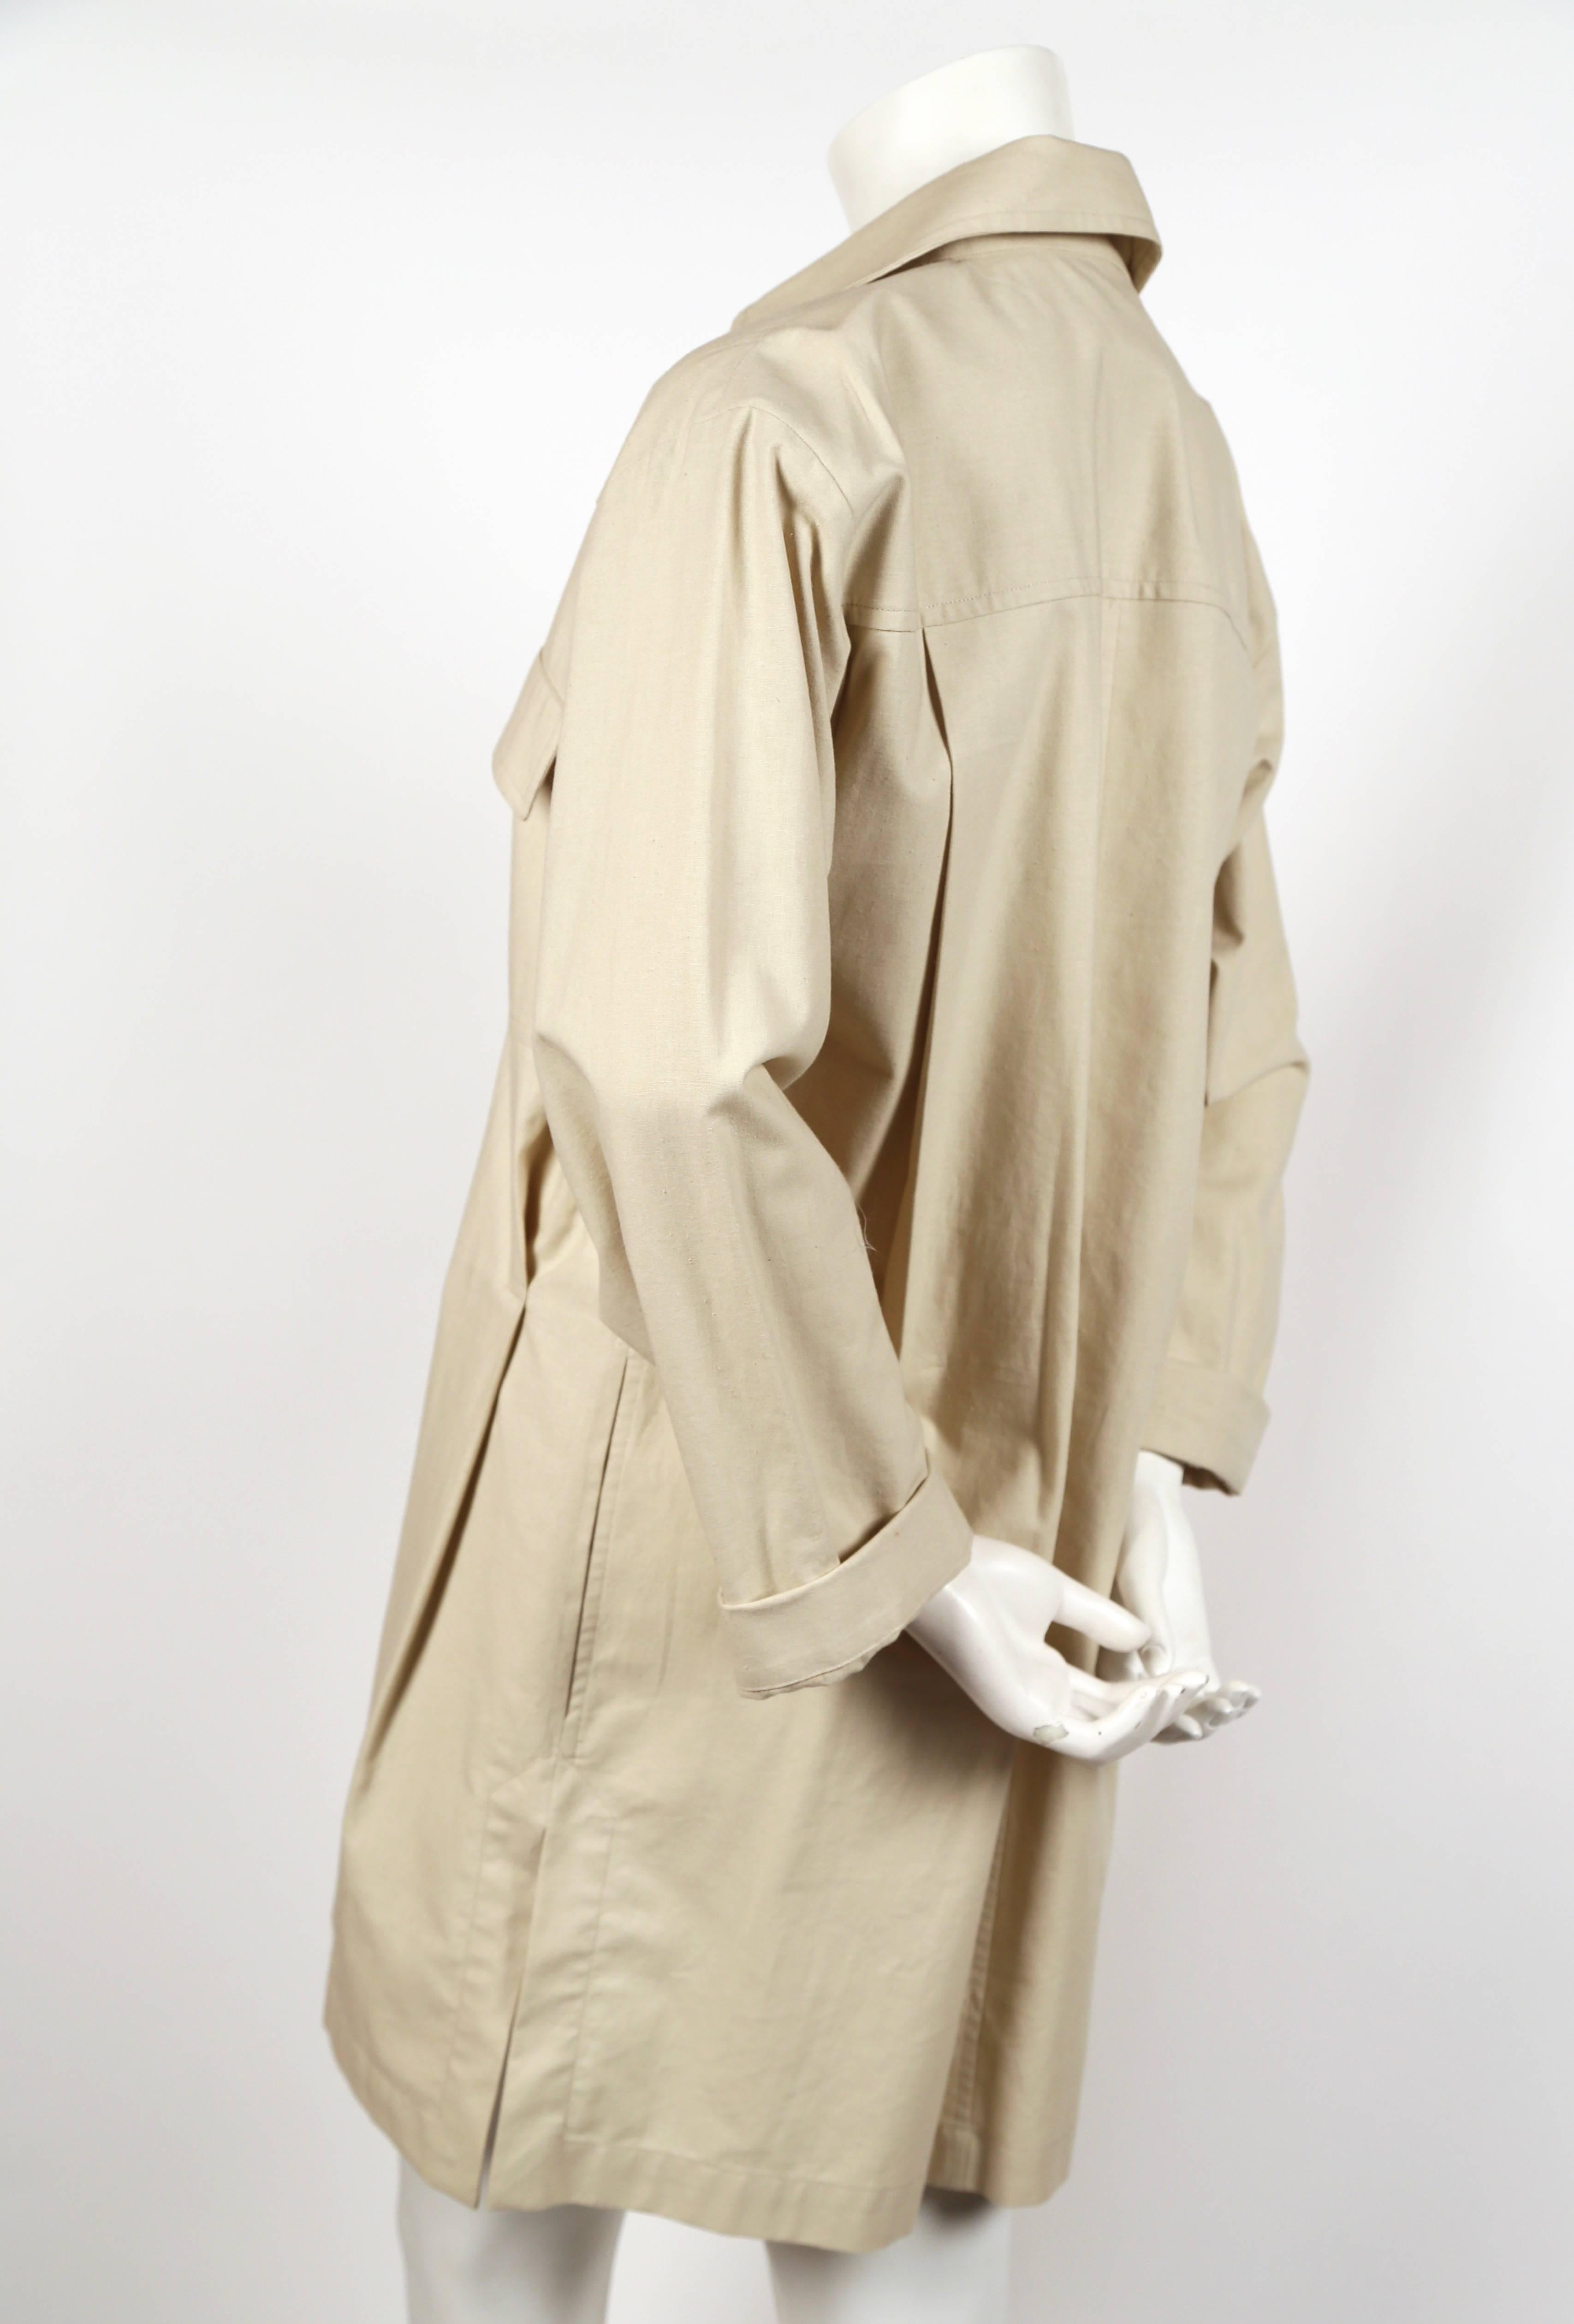 Unworn tan cotton safari tunic dress from Yves Saint Laurent dating to the 1980's. French size 36. Measures approximately: 18